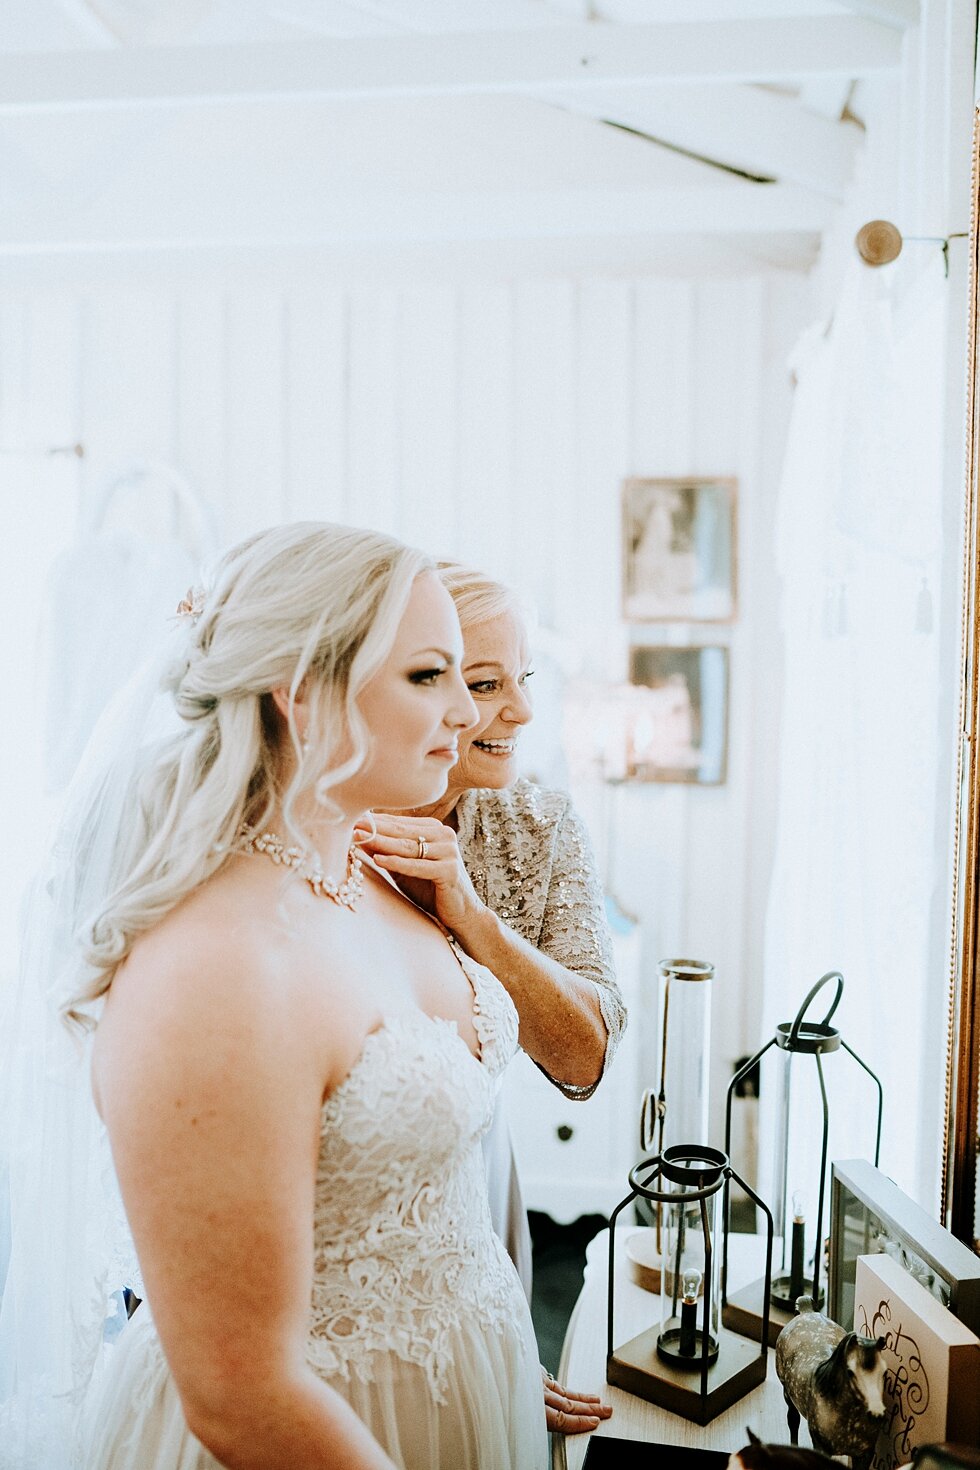  Beautiful bride putting on the final touchese before she becomes a married woman. western wedding midway kentucky vintage barn gold mirror lace wedding gown sweetheart neckline #vintagebarn #westernwedding #midwayky #vintagewedding #horses #thatsdar